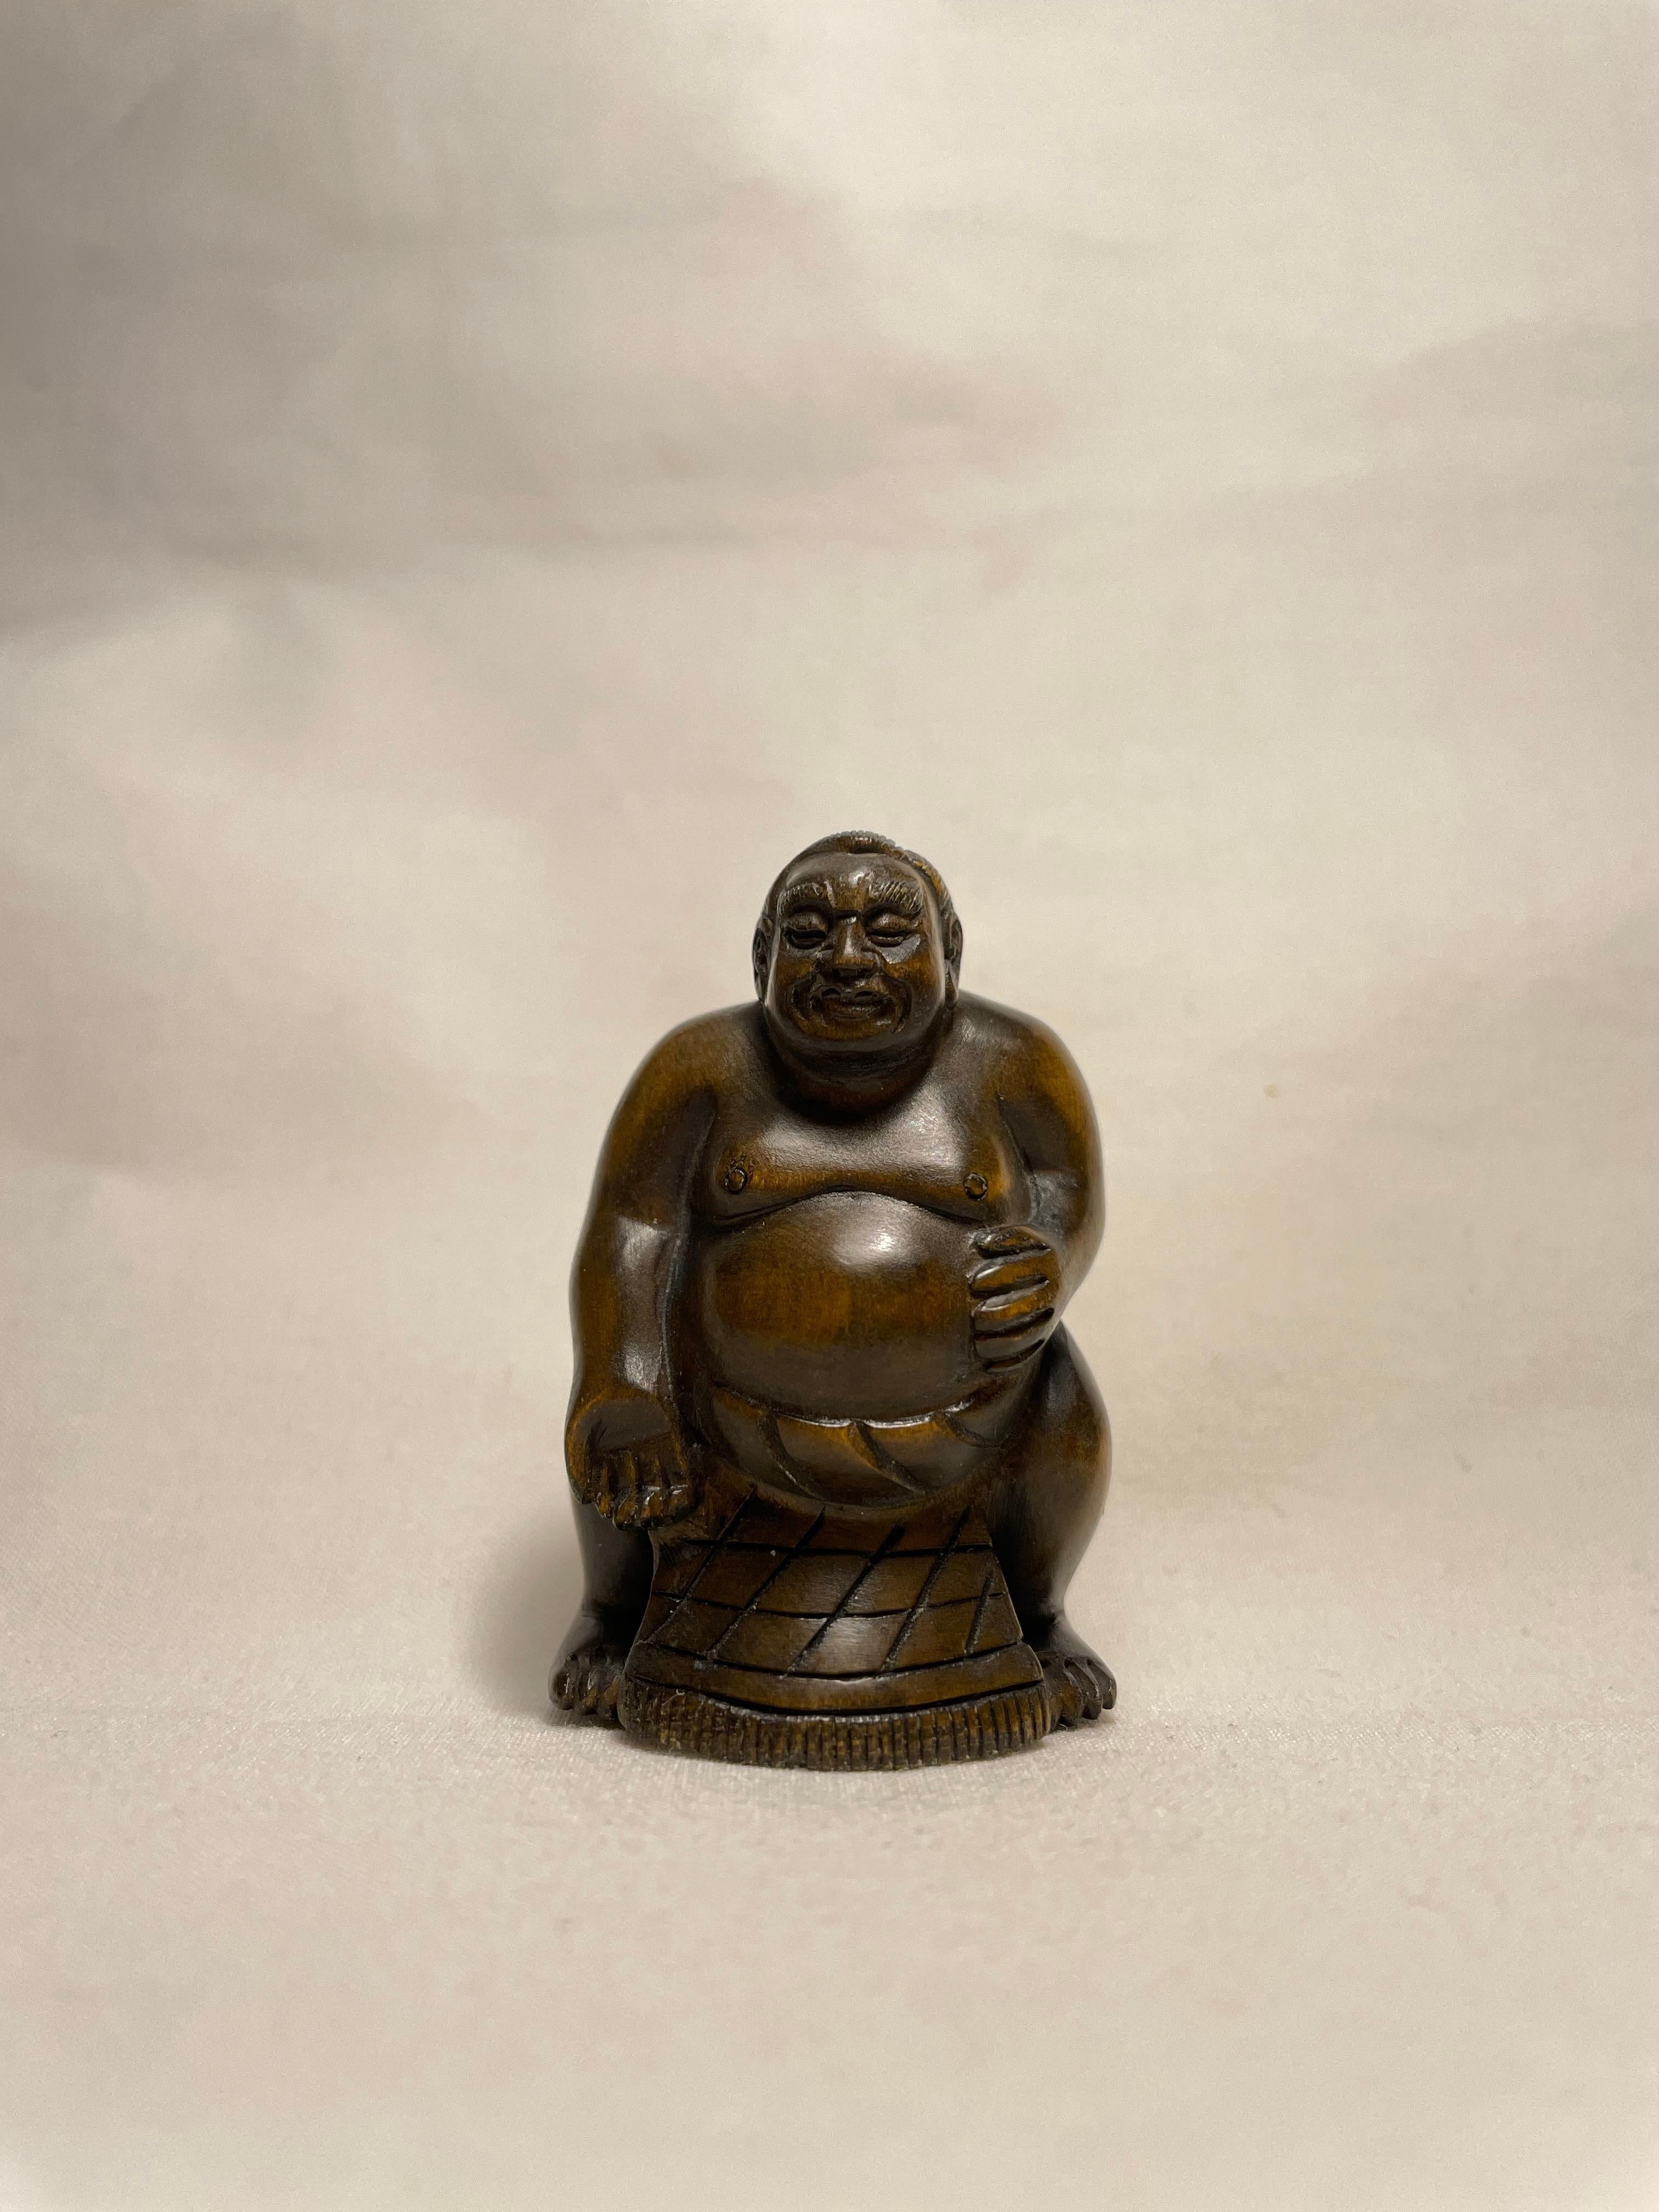 This is an antique netsuke made in Japan around Taisho period 1920s.

Netsuke is a miniature sculpture, originating in 17th century Japan.
Initially a simply-carved button fastener on the cords of an inro box, netsuke later developed into ornately